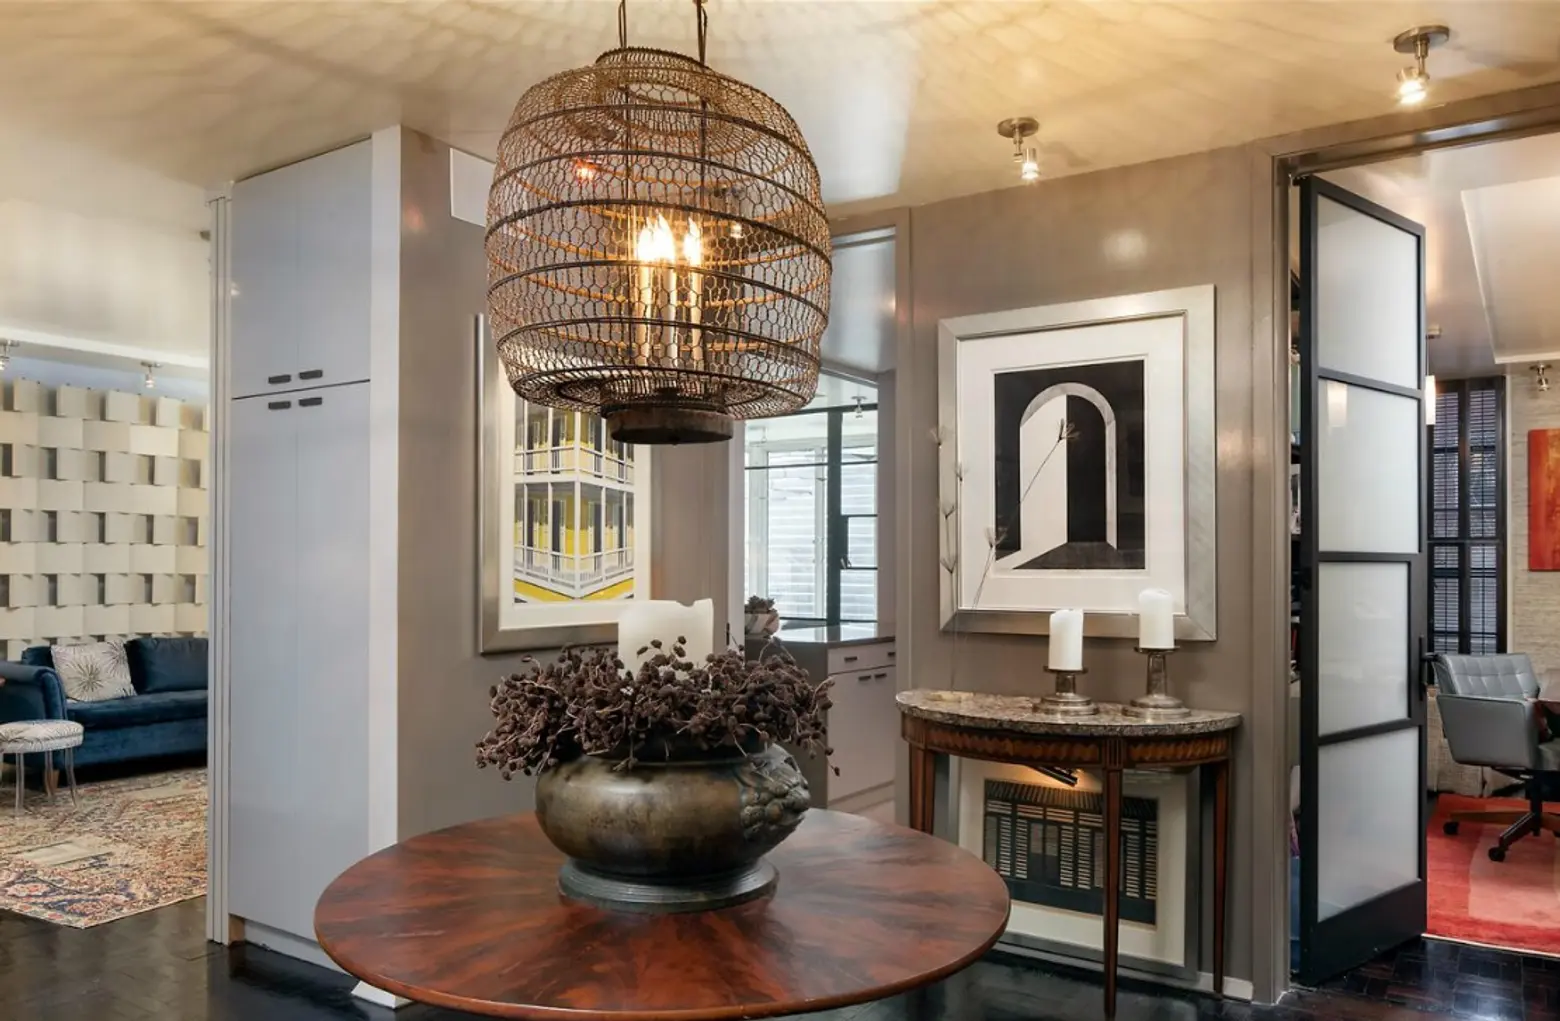 Gorgeous Two-Bedroom Greenwich Village Gem in Sought After Butterfield House for $2.8M